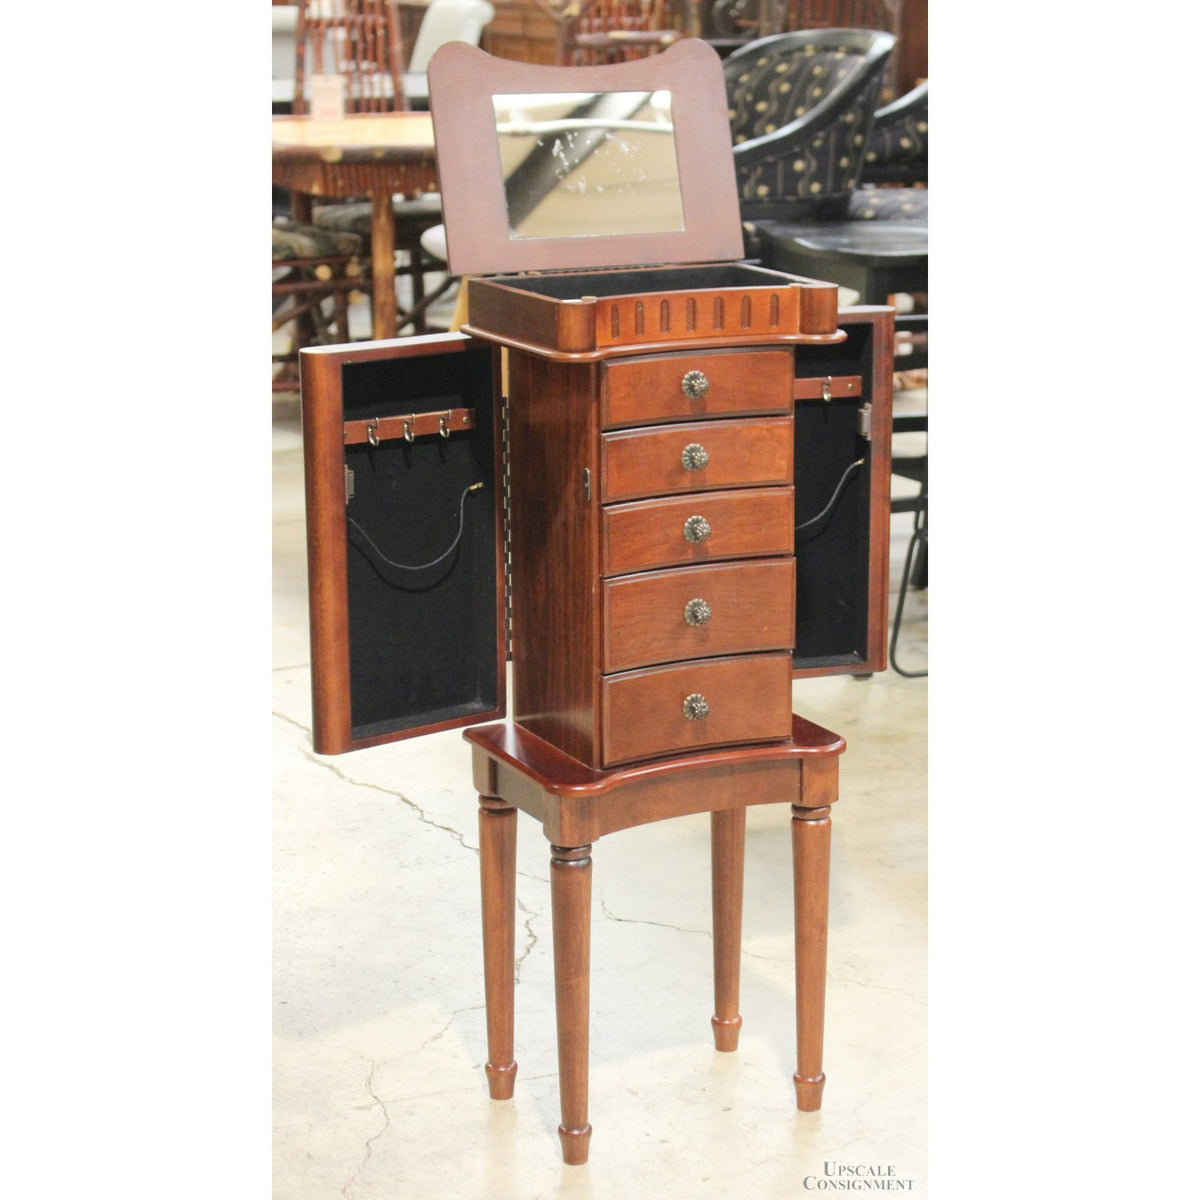 Inter-American Products Mahogany Jewelry Armoire